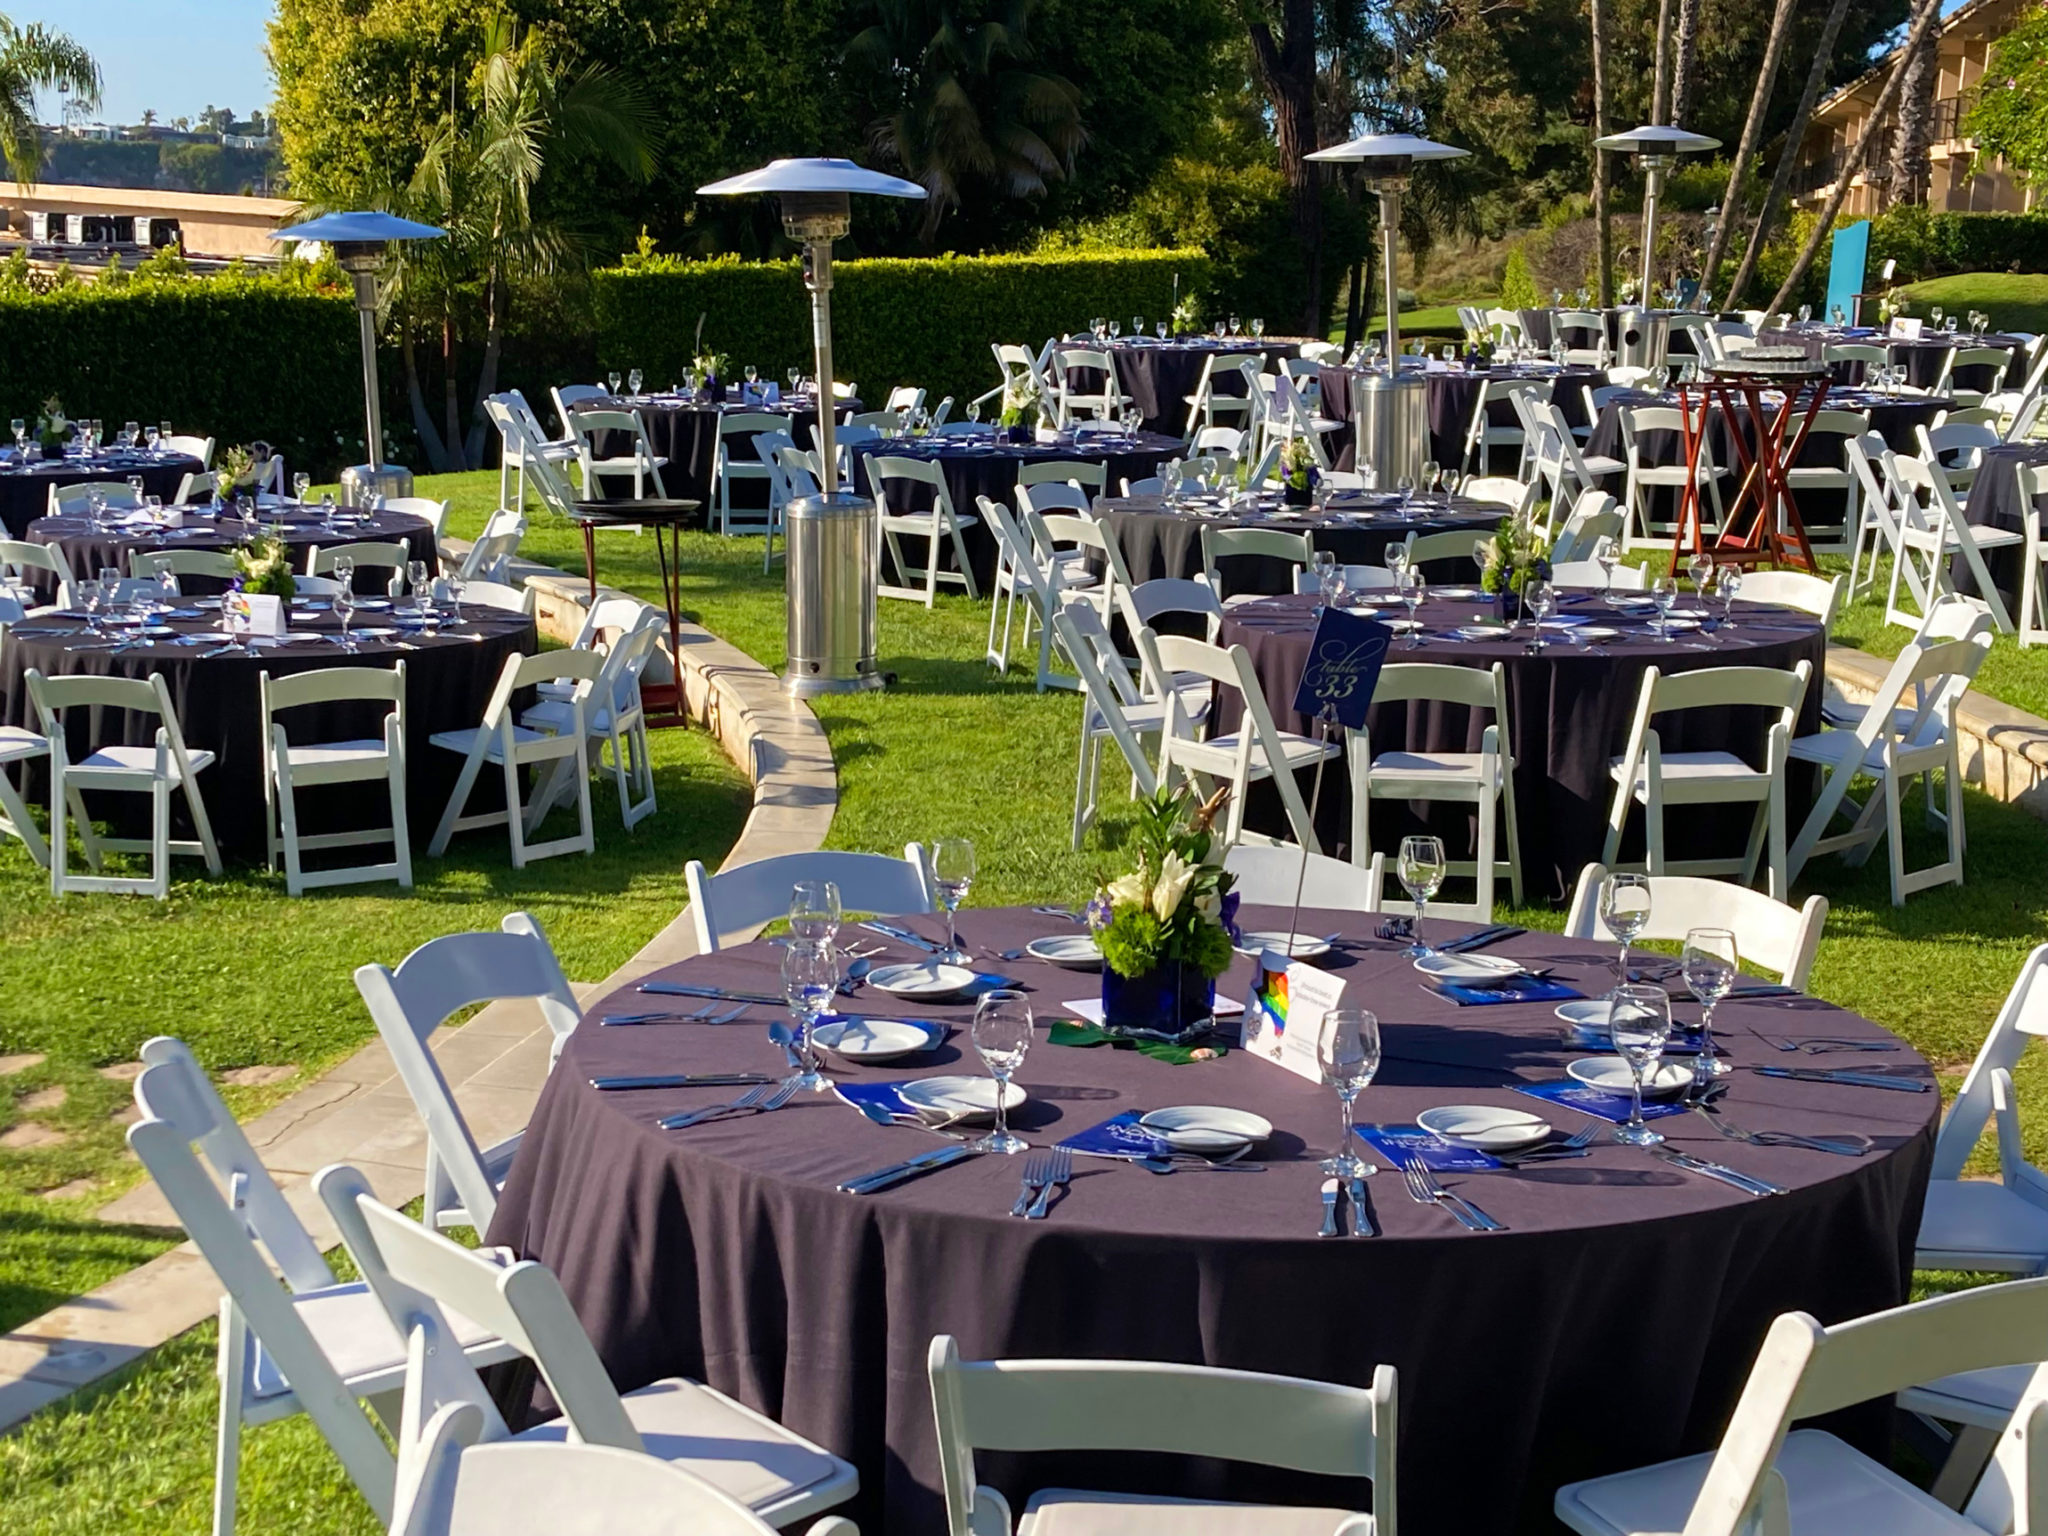 Bloom Parlor florist and floral event planner arrangements for LGBTQ Center of Orange County Indigo Ball in Newport Beach California